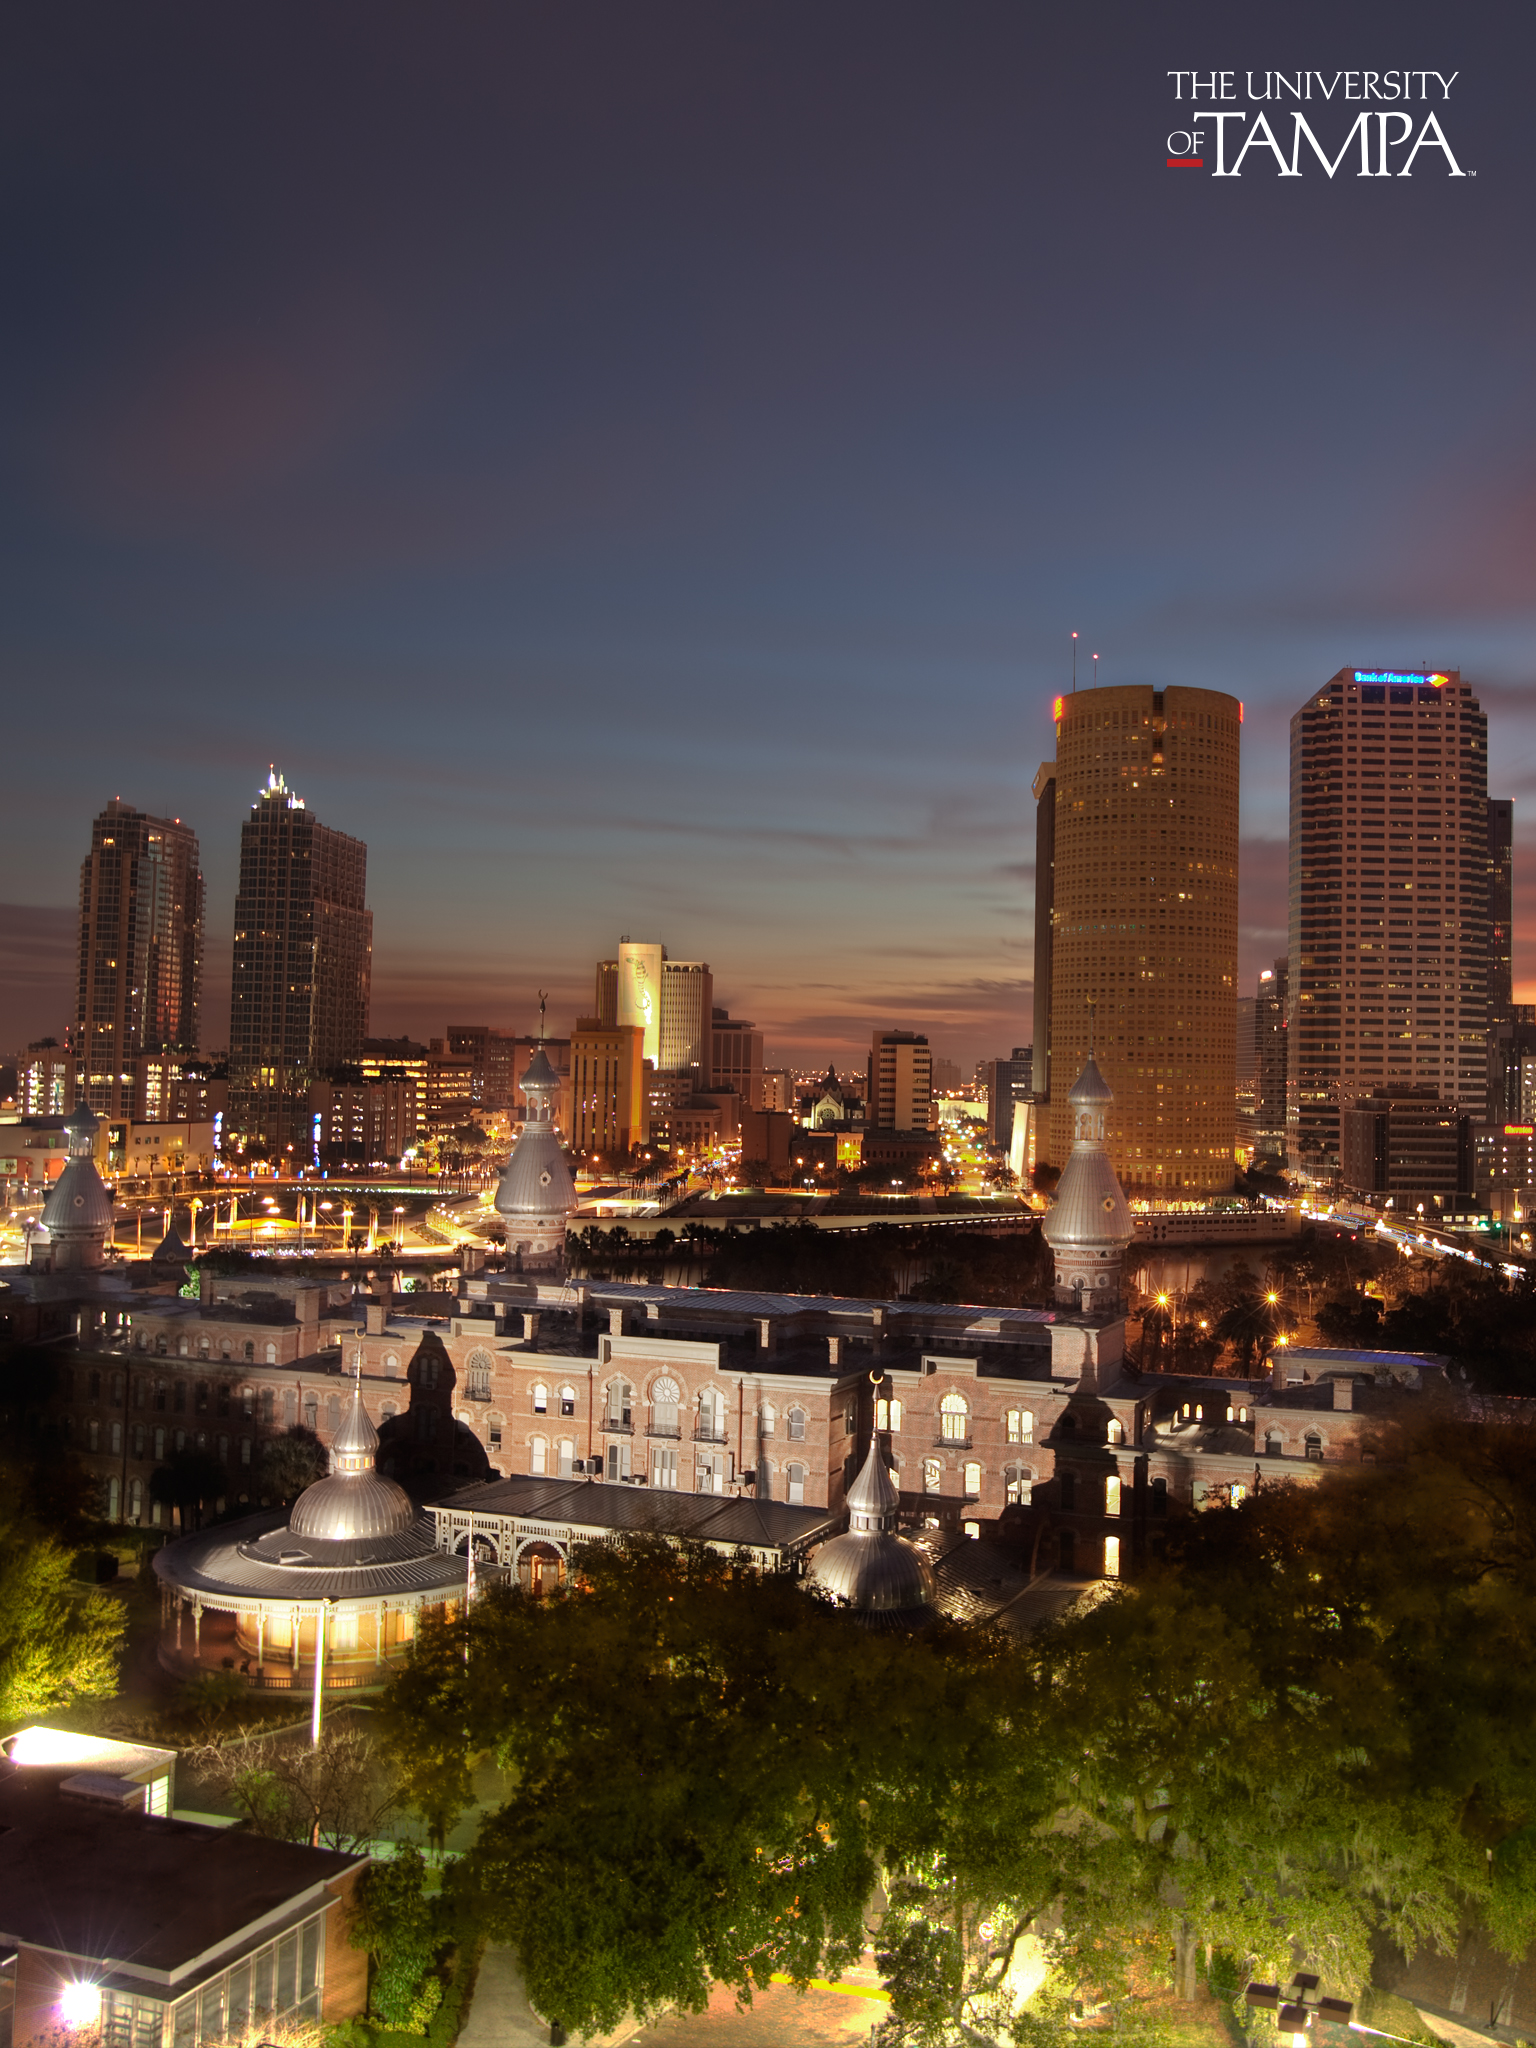 The University Of Tampa Public Information Wallpaper S